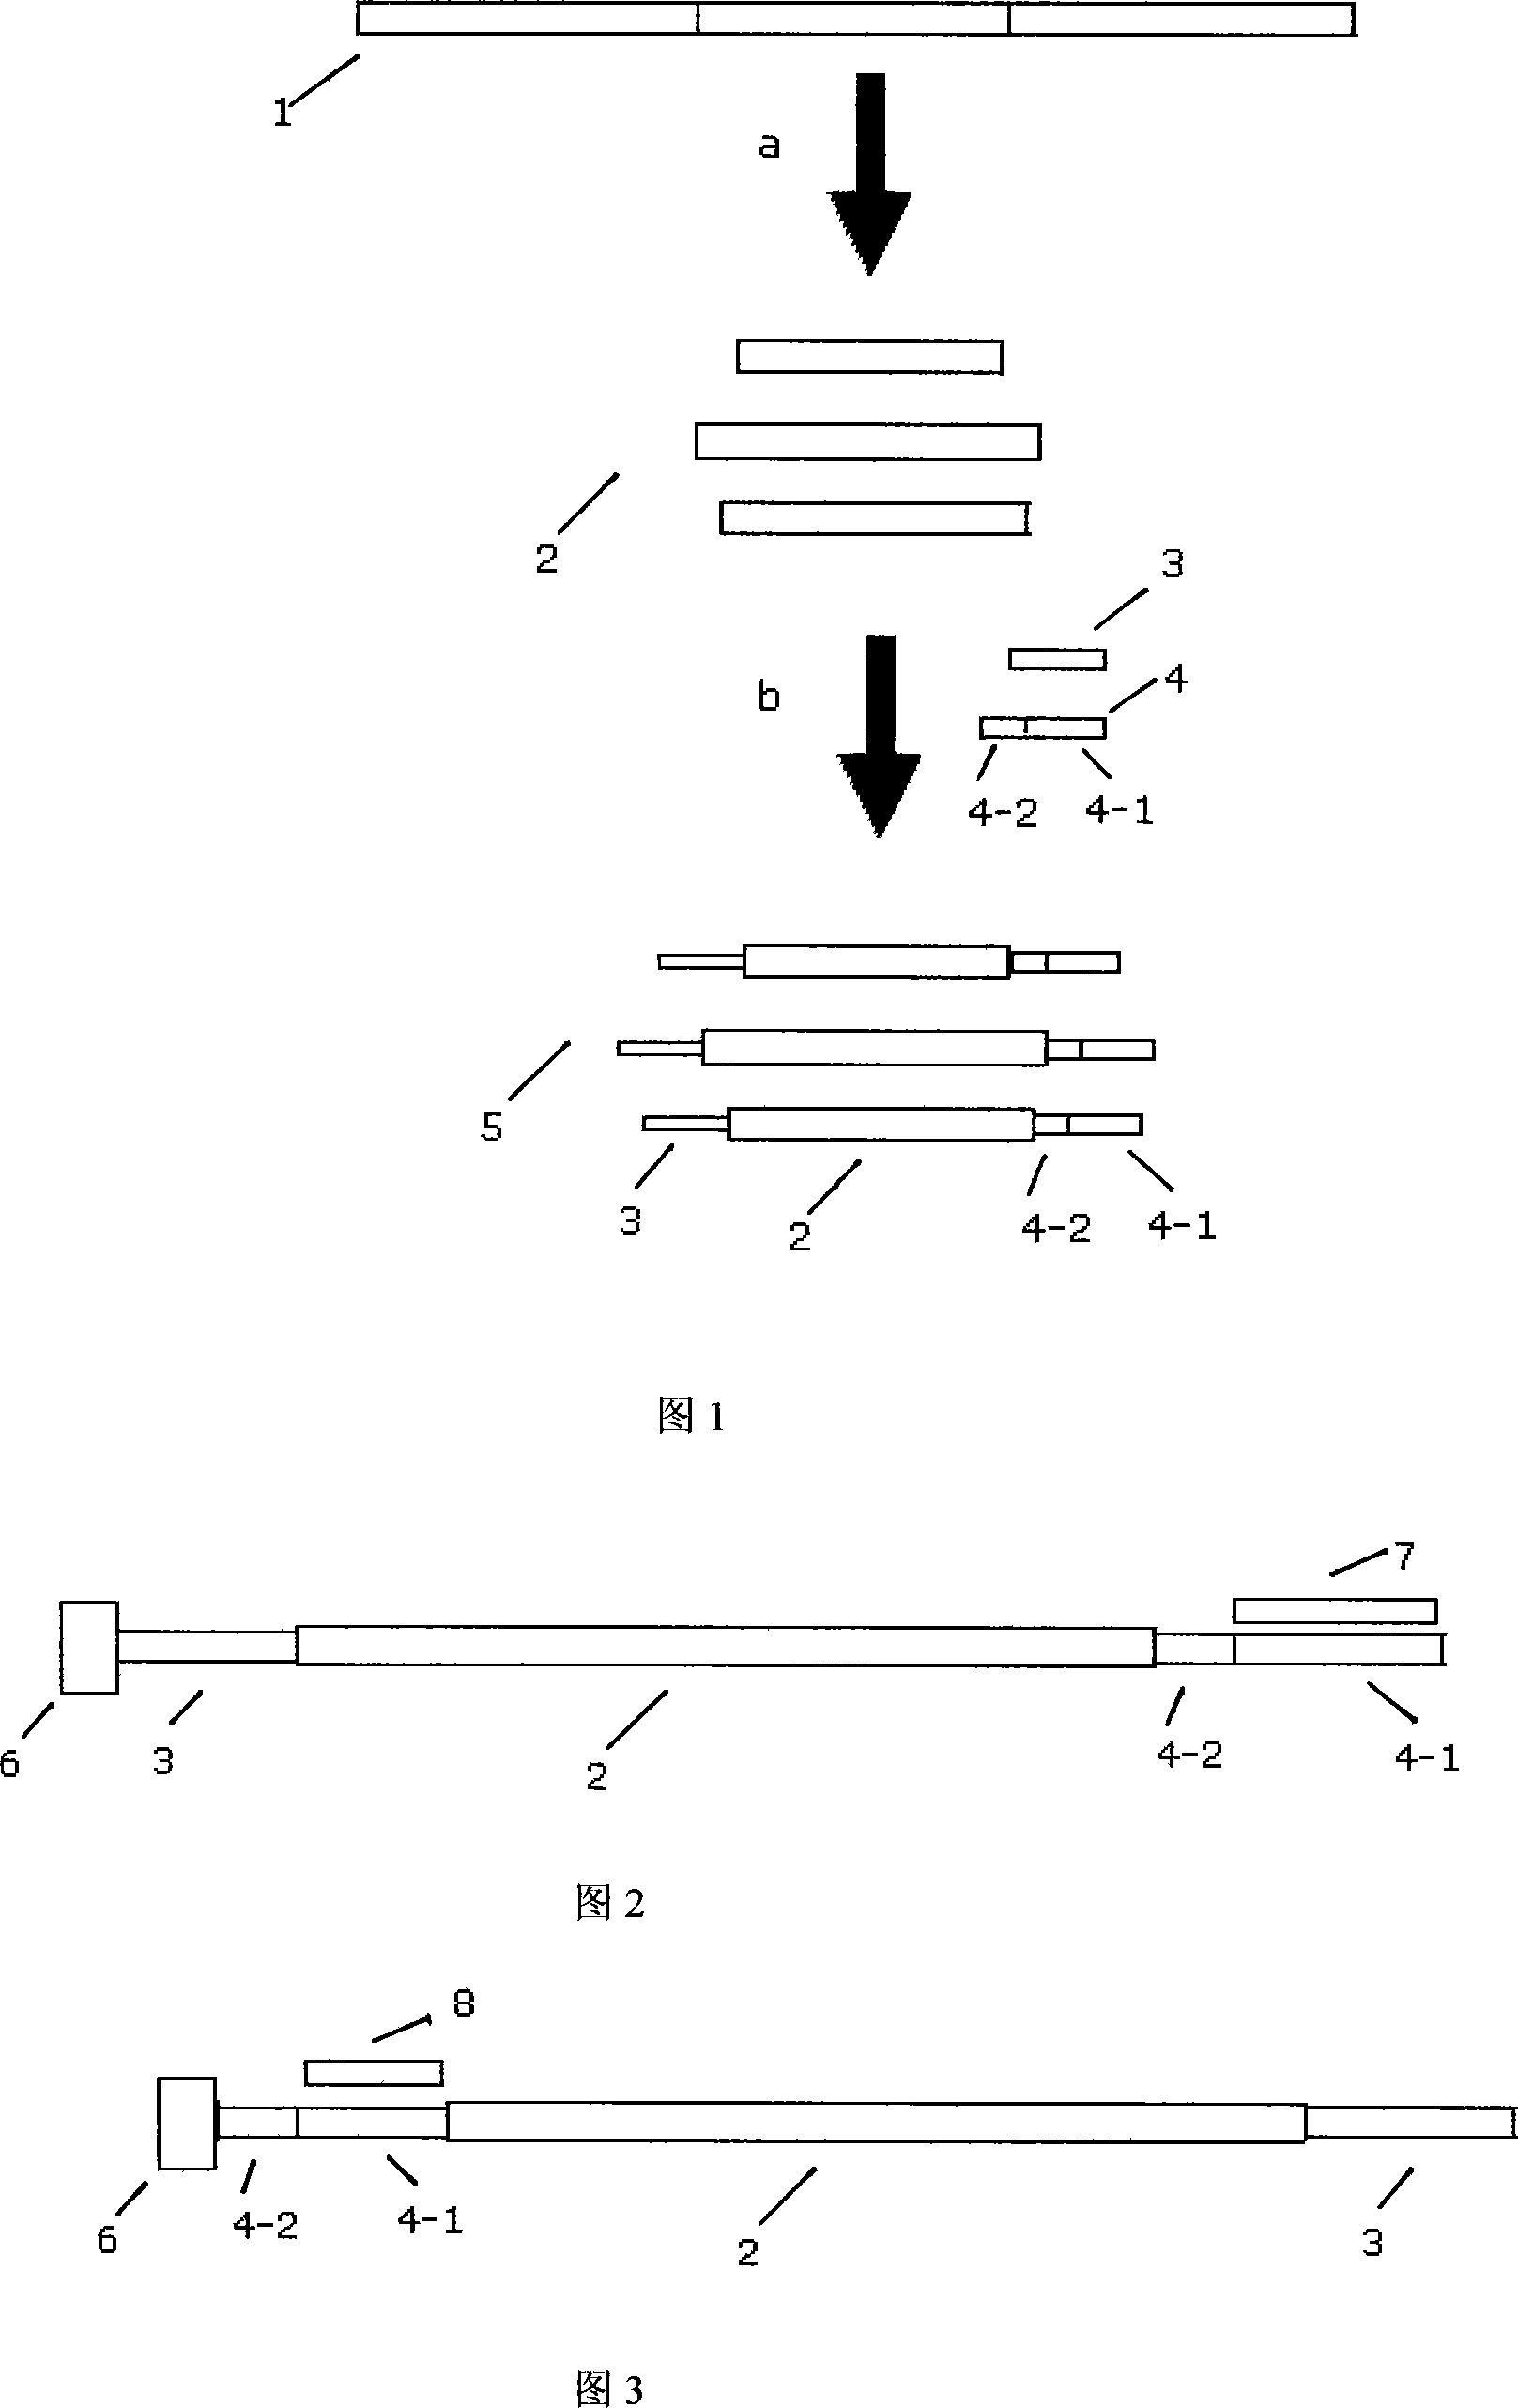 Coding and decoding method for determined nucleic acid sequence